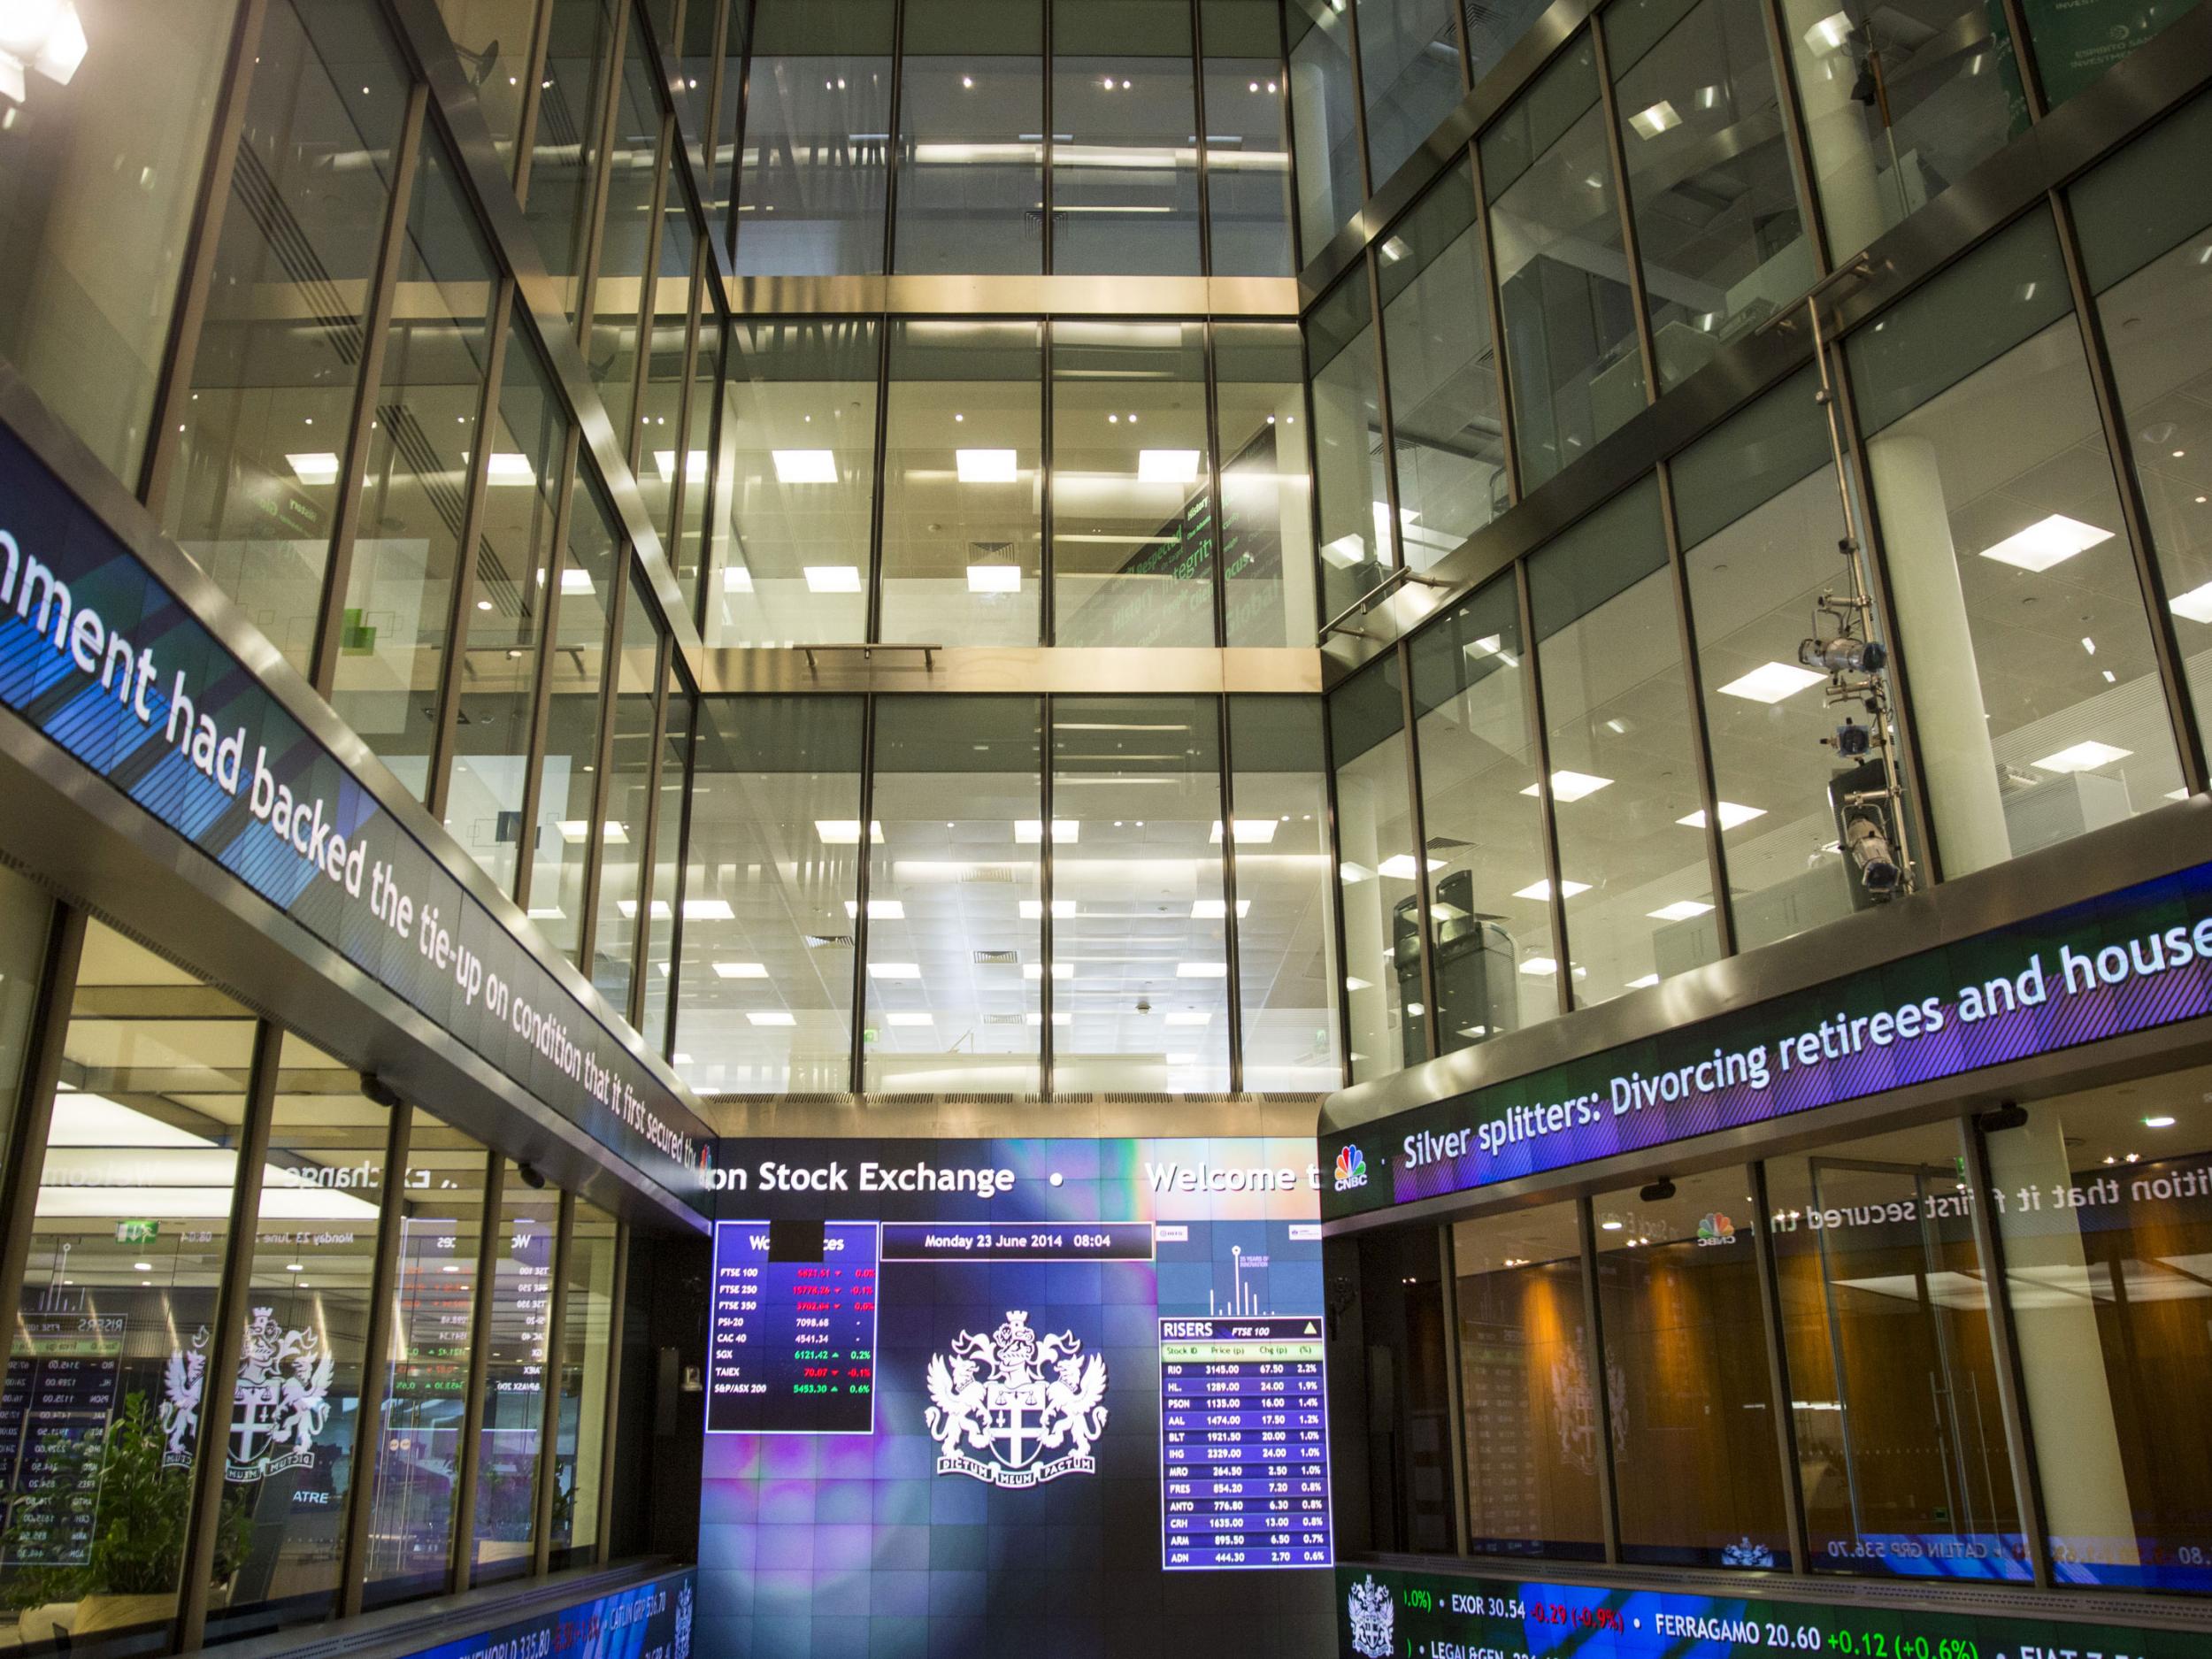 Arqiva said it would 'revisit the listing once IPO market conditions improve'